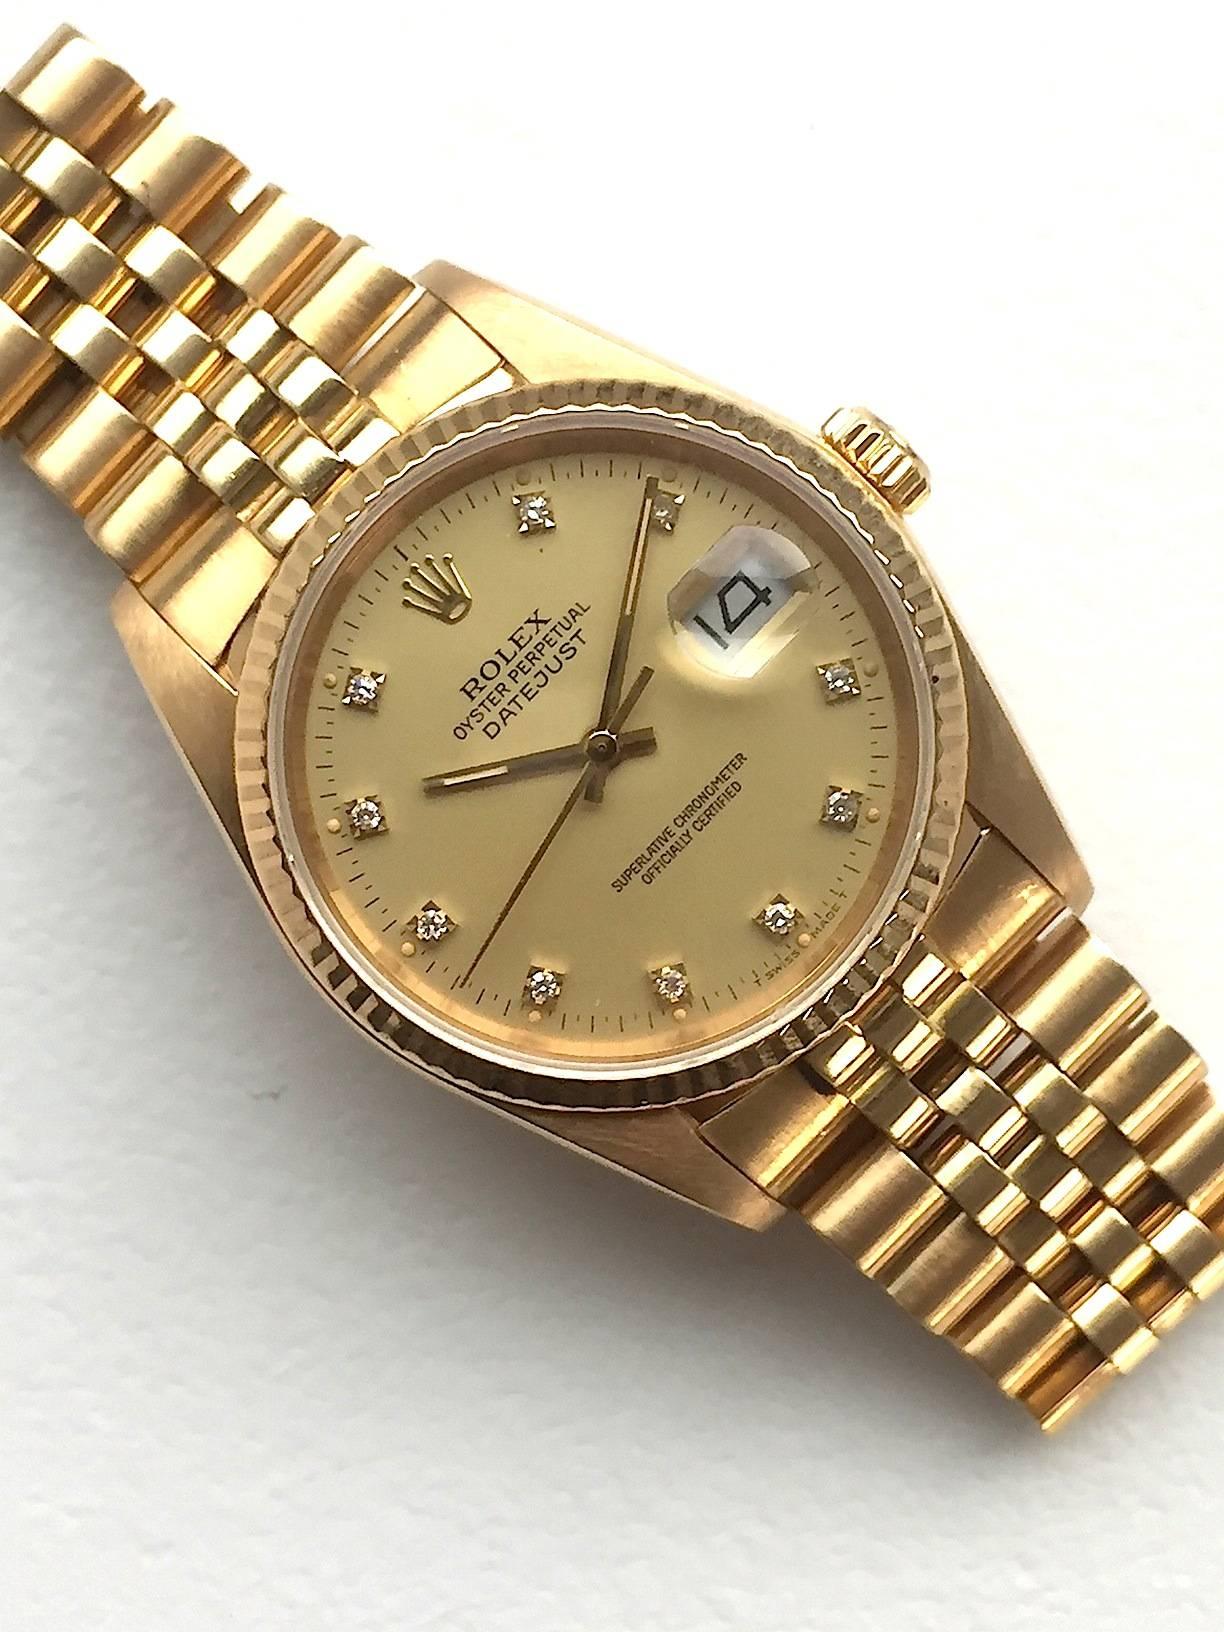 Rolex 18K Yellow Gold Oyster Perpetual Datejust with Factory Yellow Diamond Dial
Beautiful Factory Yellow/Lemon Factory Diamond Dial with Diamond Hour Markers
Yellow Gold Gold Fluted Bezel
18K Yellow Gold Case
36mm in size 
Features Rolex Automatic